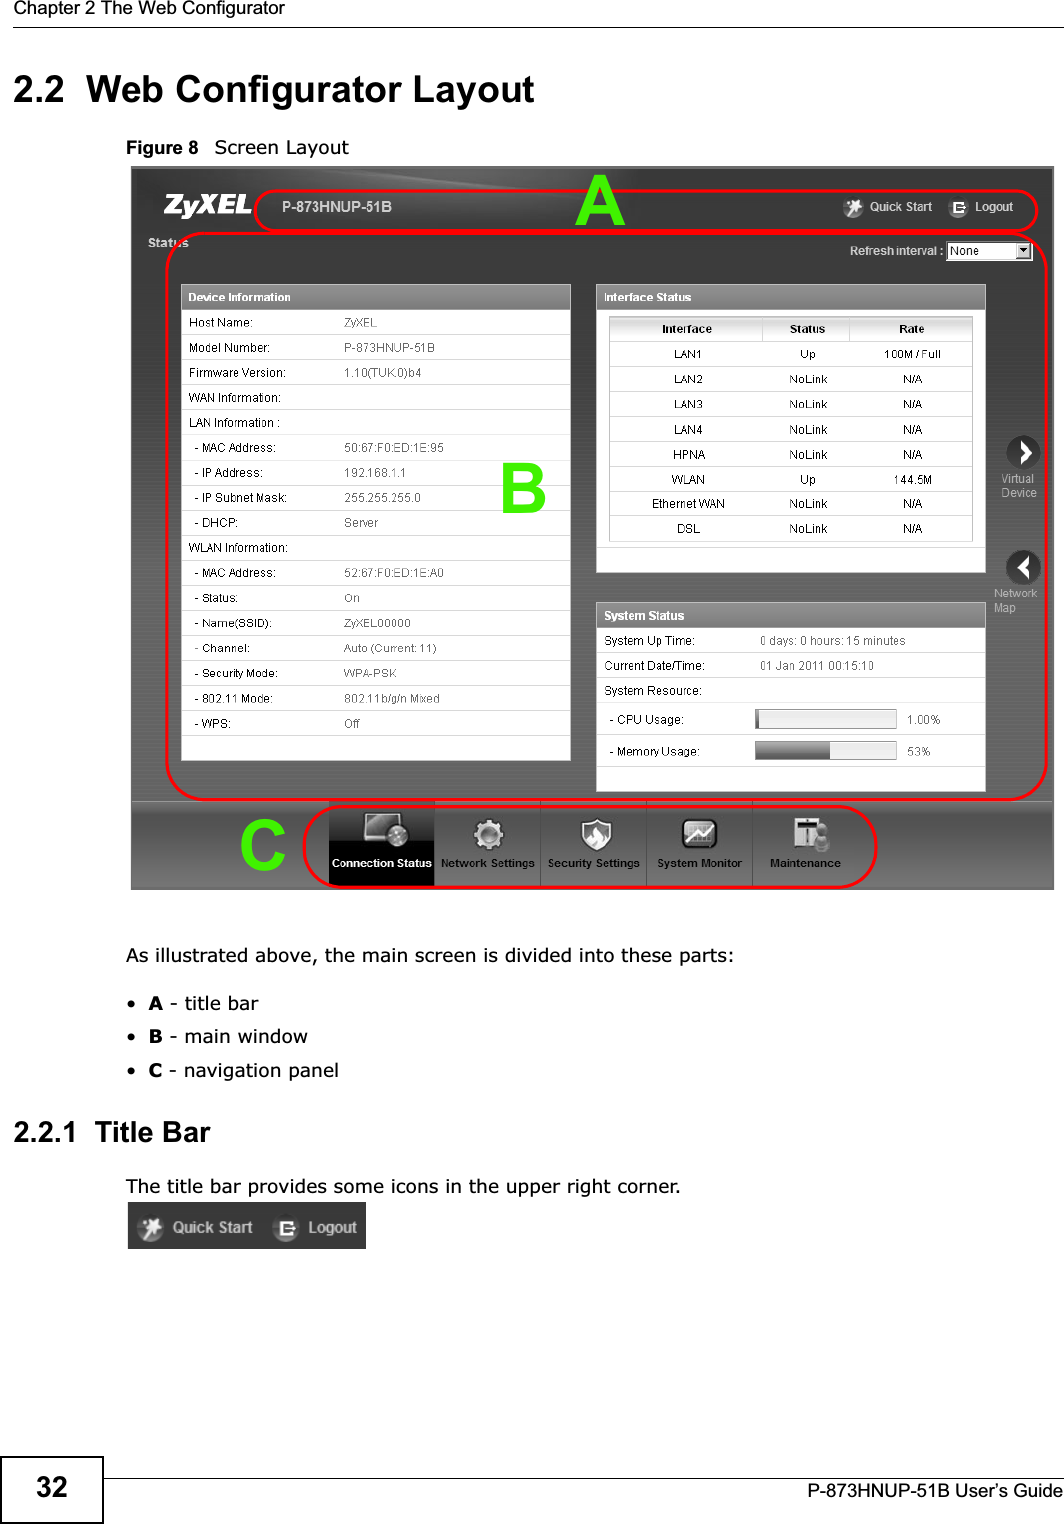 Chapter 2 The Web ConfiguratorP-873HNUP-51B User’s Guide322.2  Web Configurator LayoutFigure 8   Screen LayoutAs illustrated above, the main screen is divided into these parts:•A - title bar•B - main window •C - navigation panel2.2.1  Title BarThe title bar provides some icons in the upper right corner.BCA